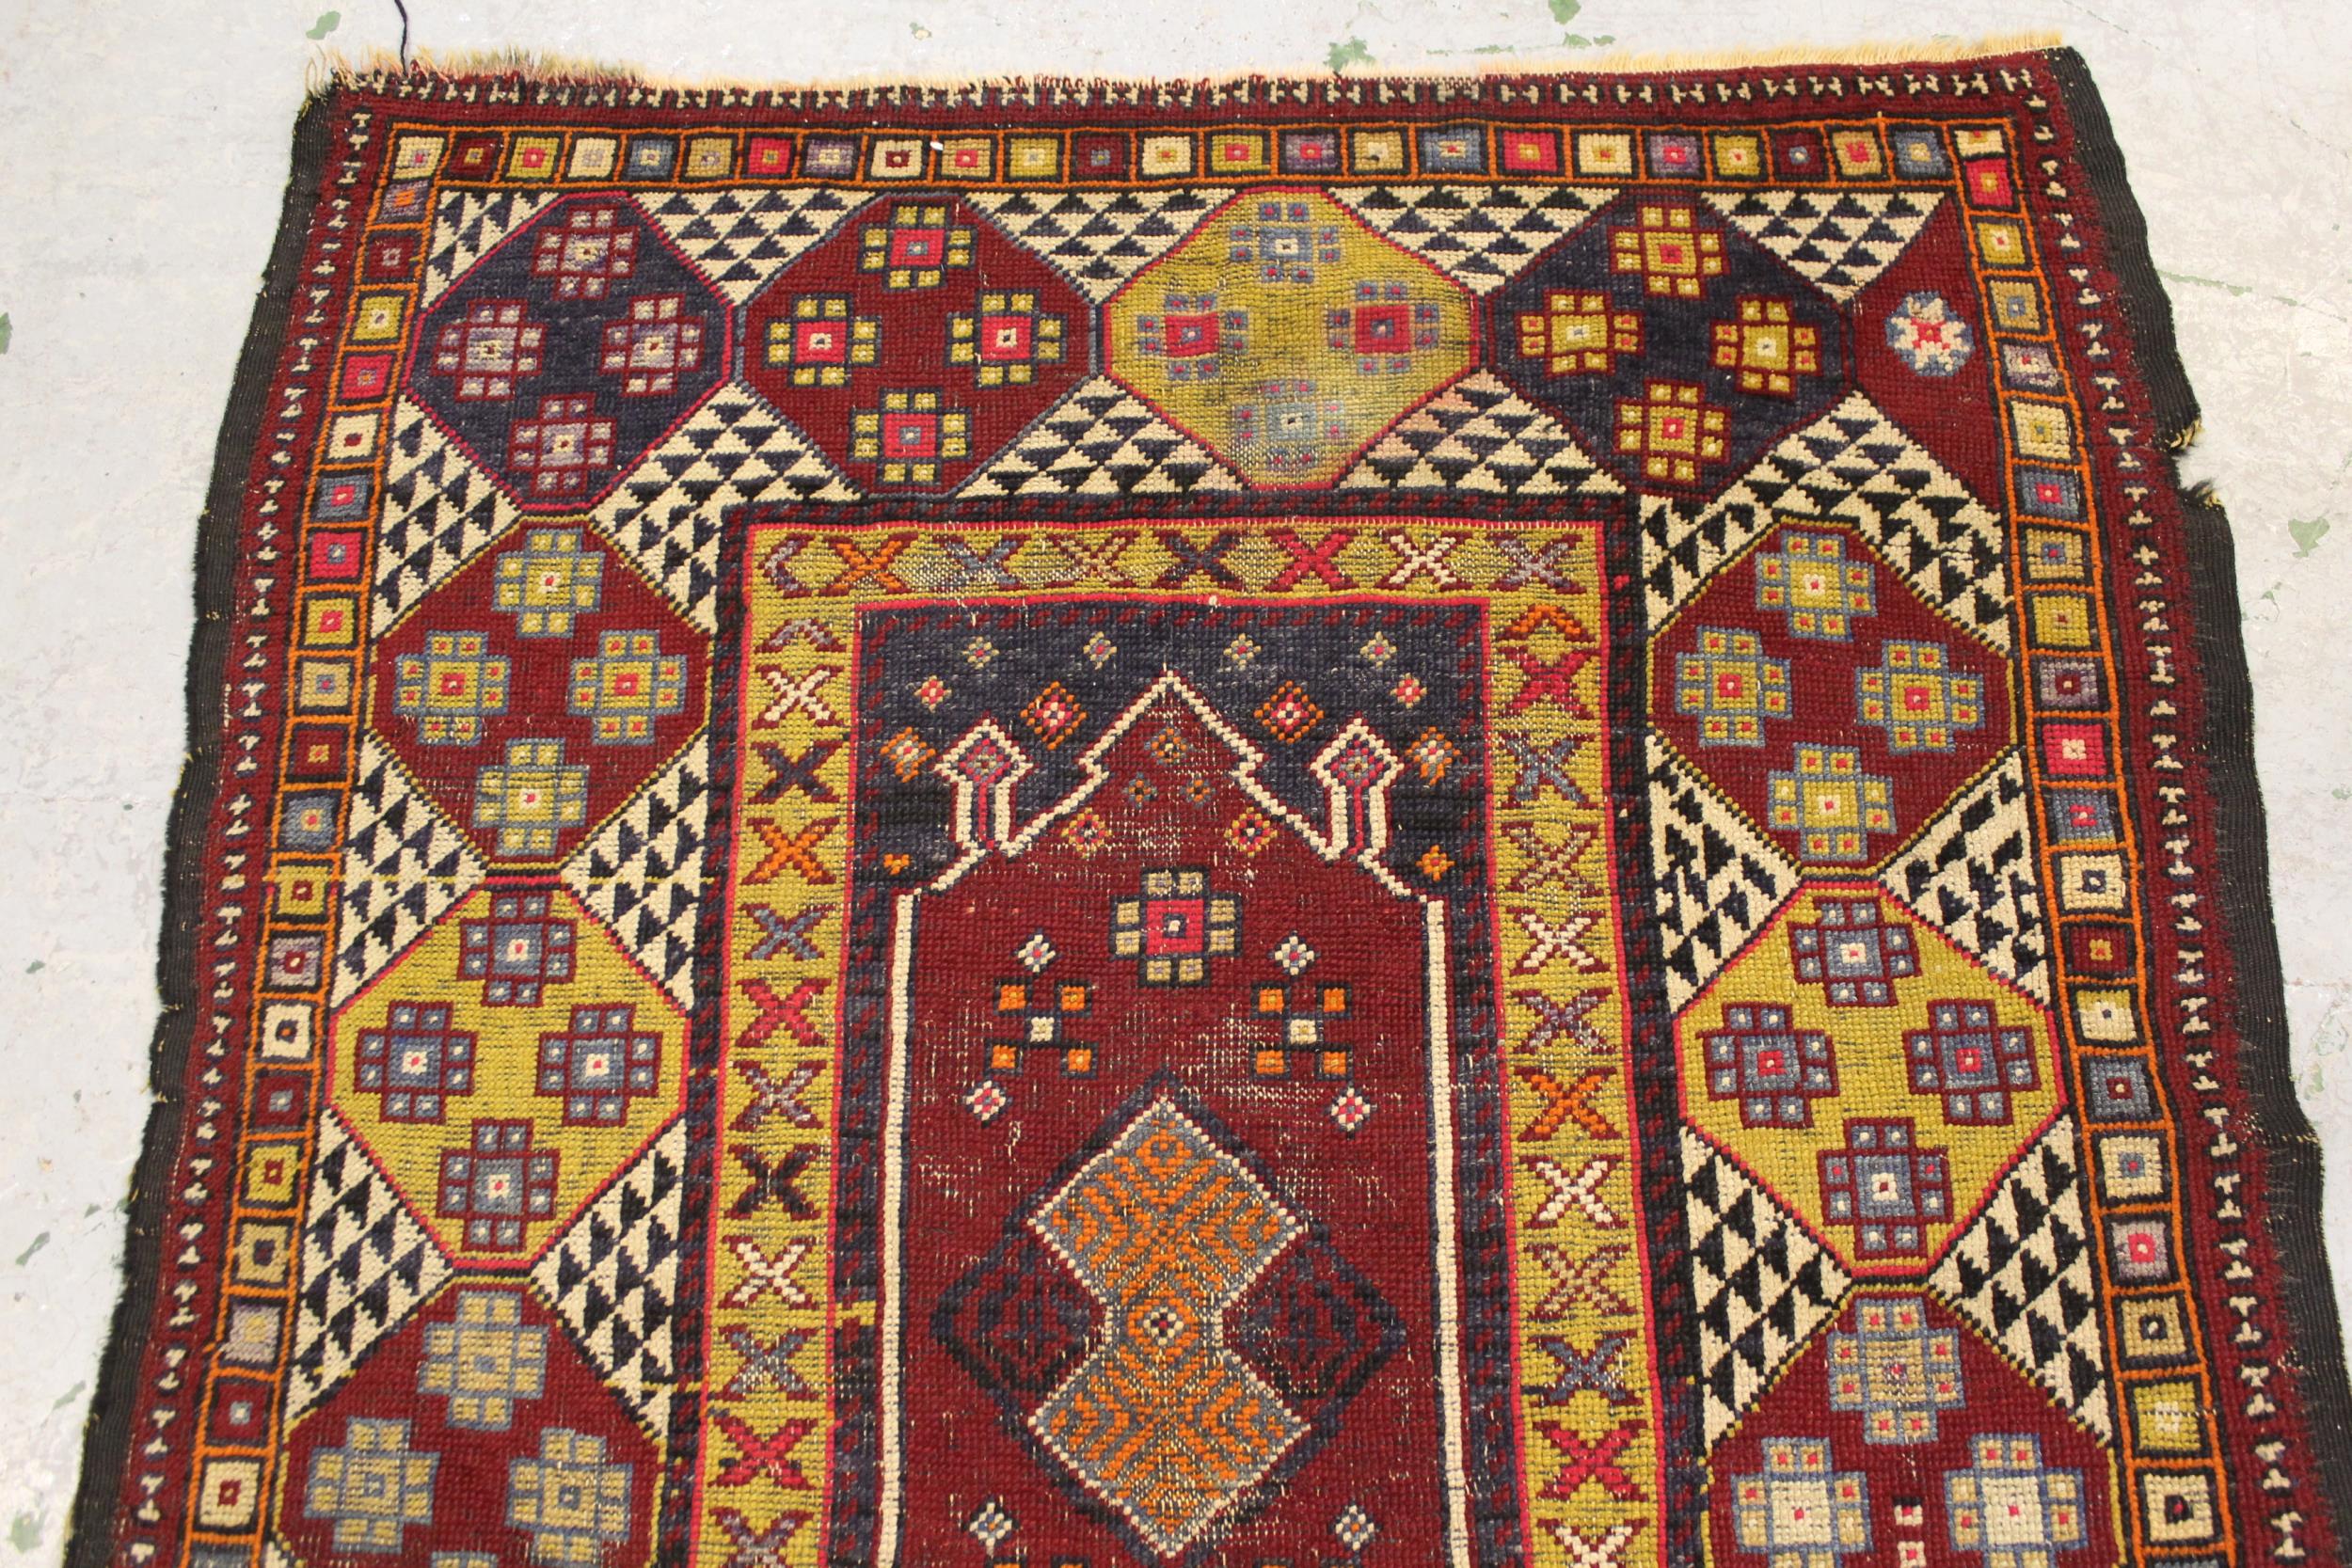 Small Anatolean rug with a central panel design and wide borders, in multiple colours, 5ft x 4ft - Image 2 of 4